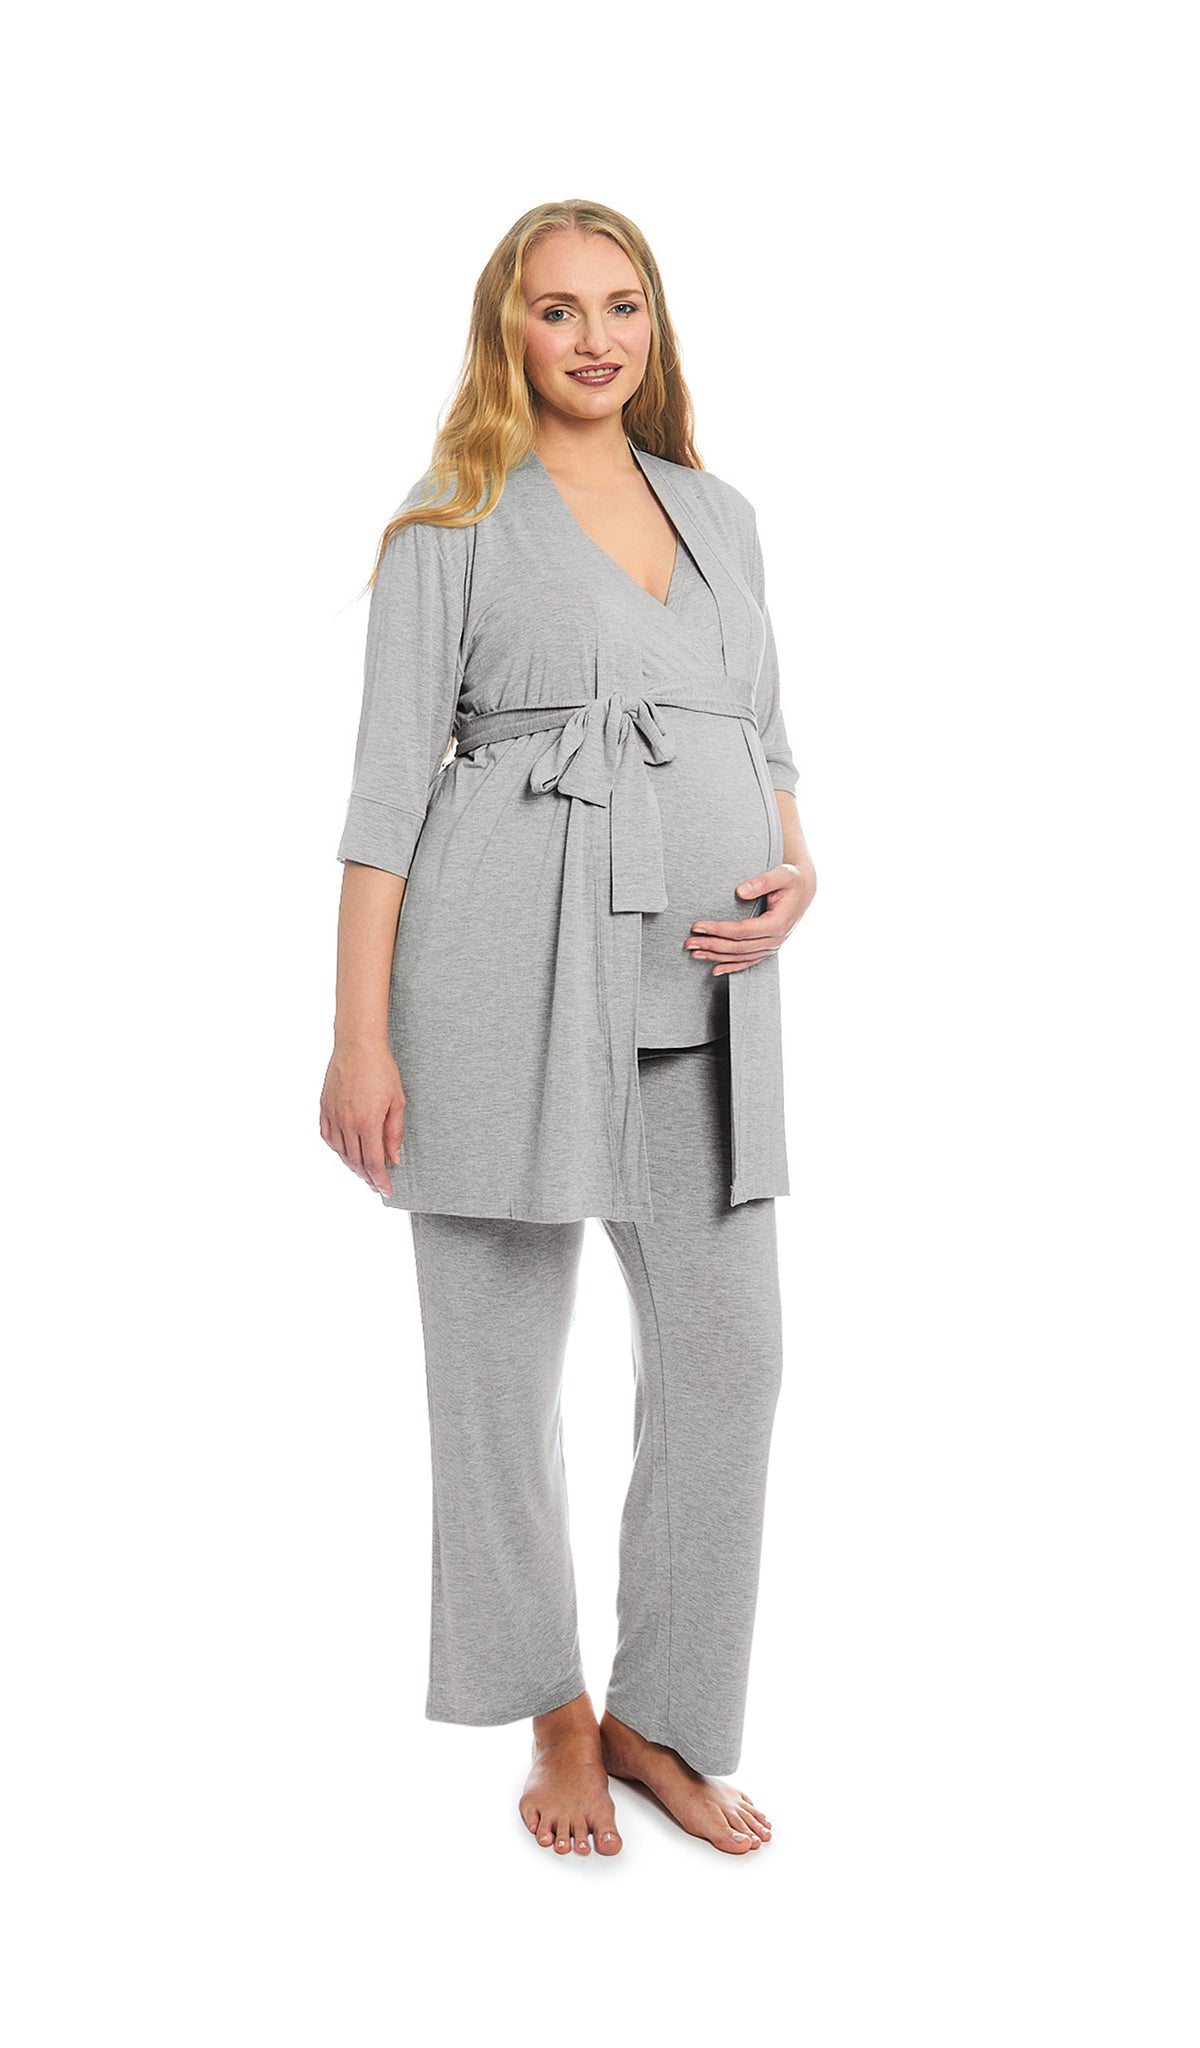 Heather Grey Solid Analise 3-Piece Set. Pregnant woman wearing 3/4 sleeve robe, tank top and pant, with one hand holding belly.